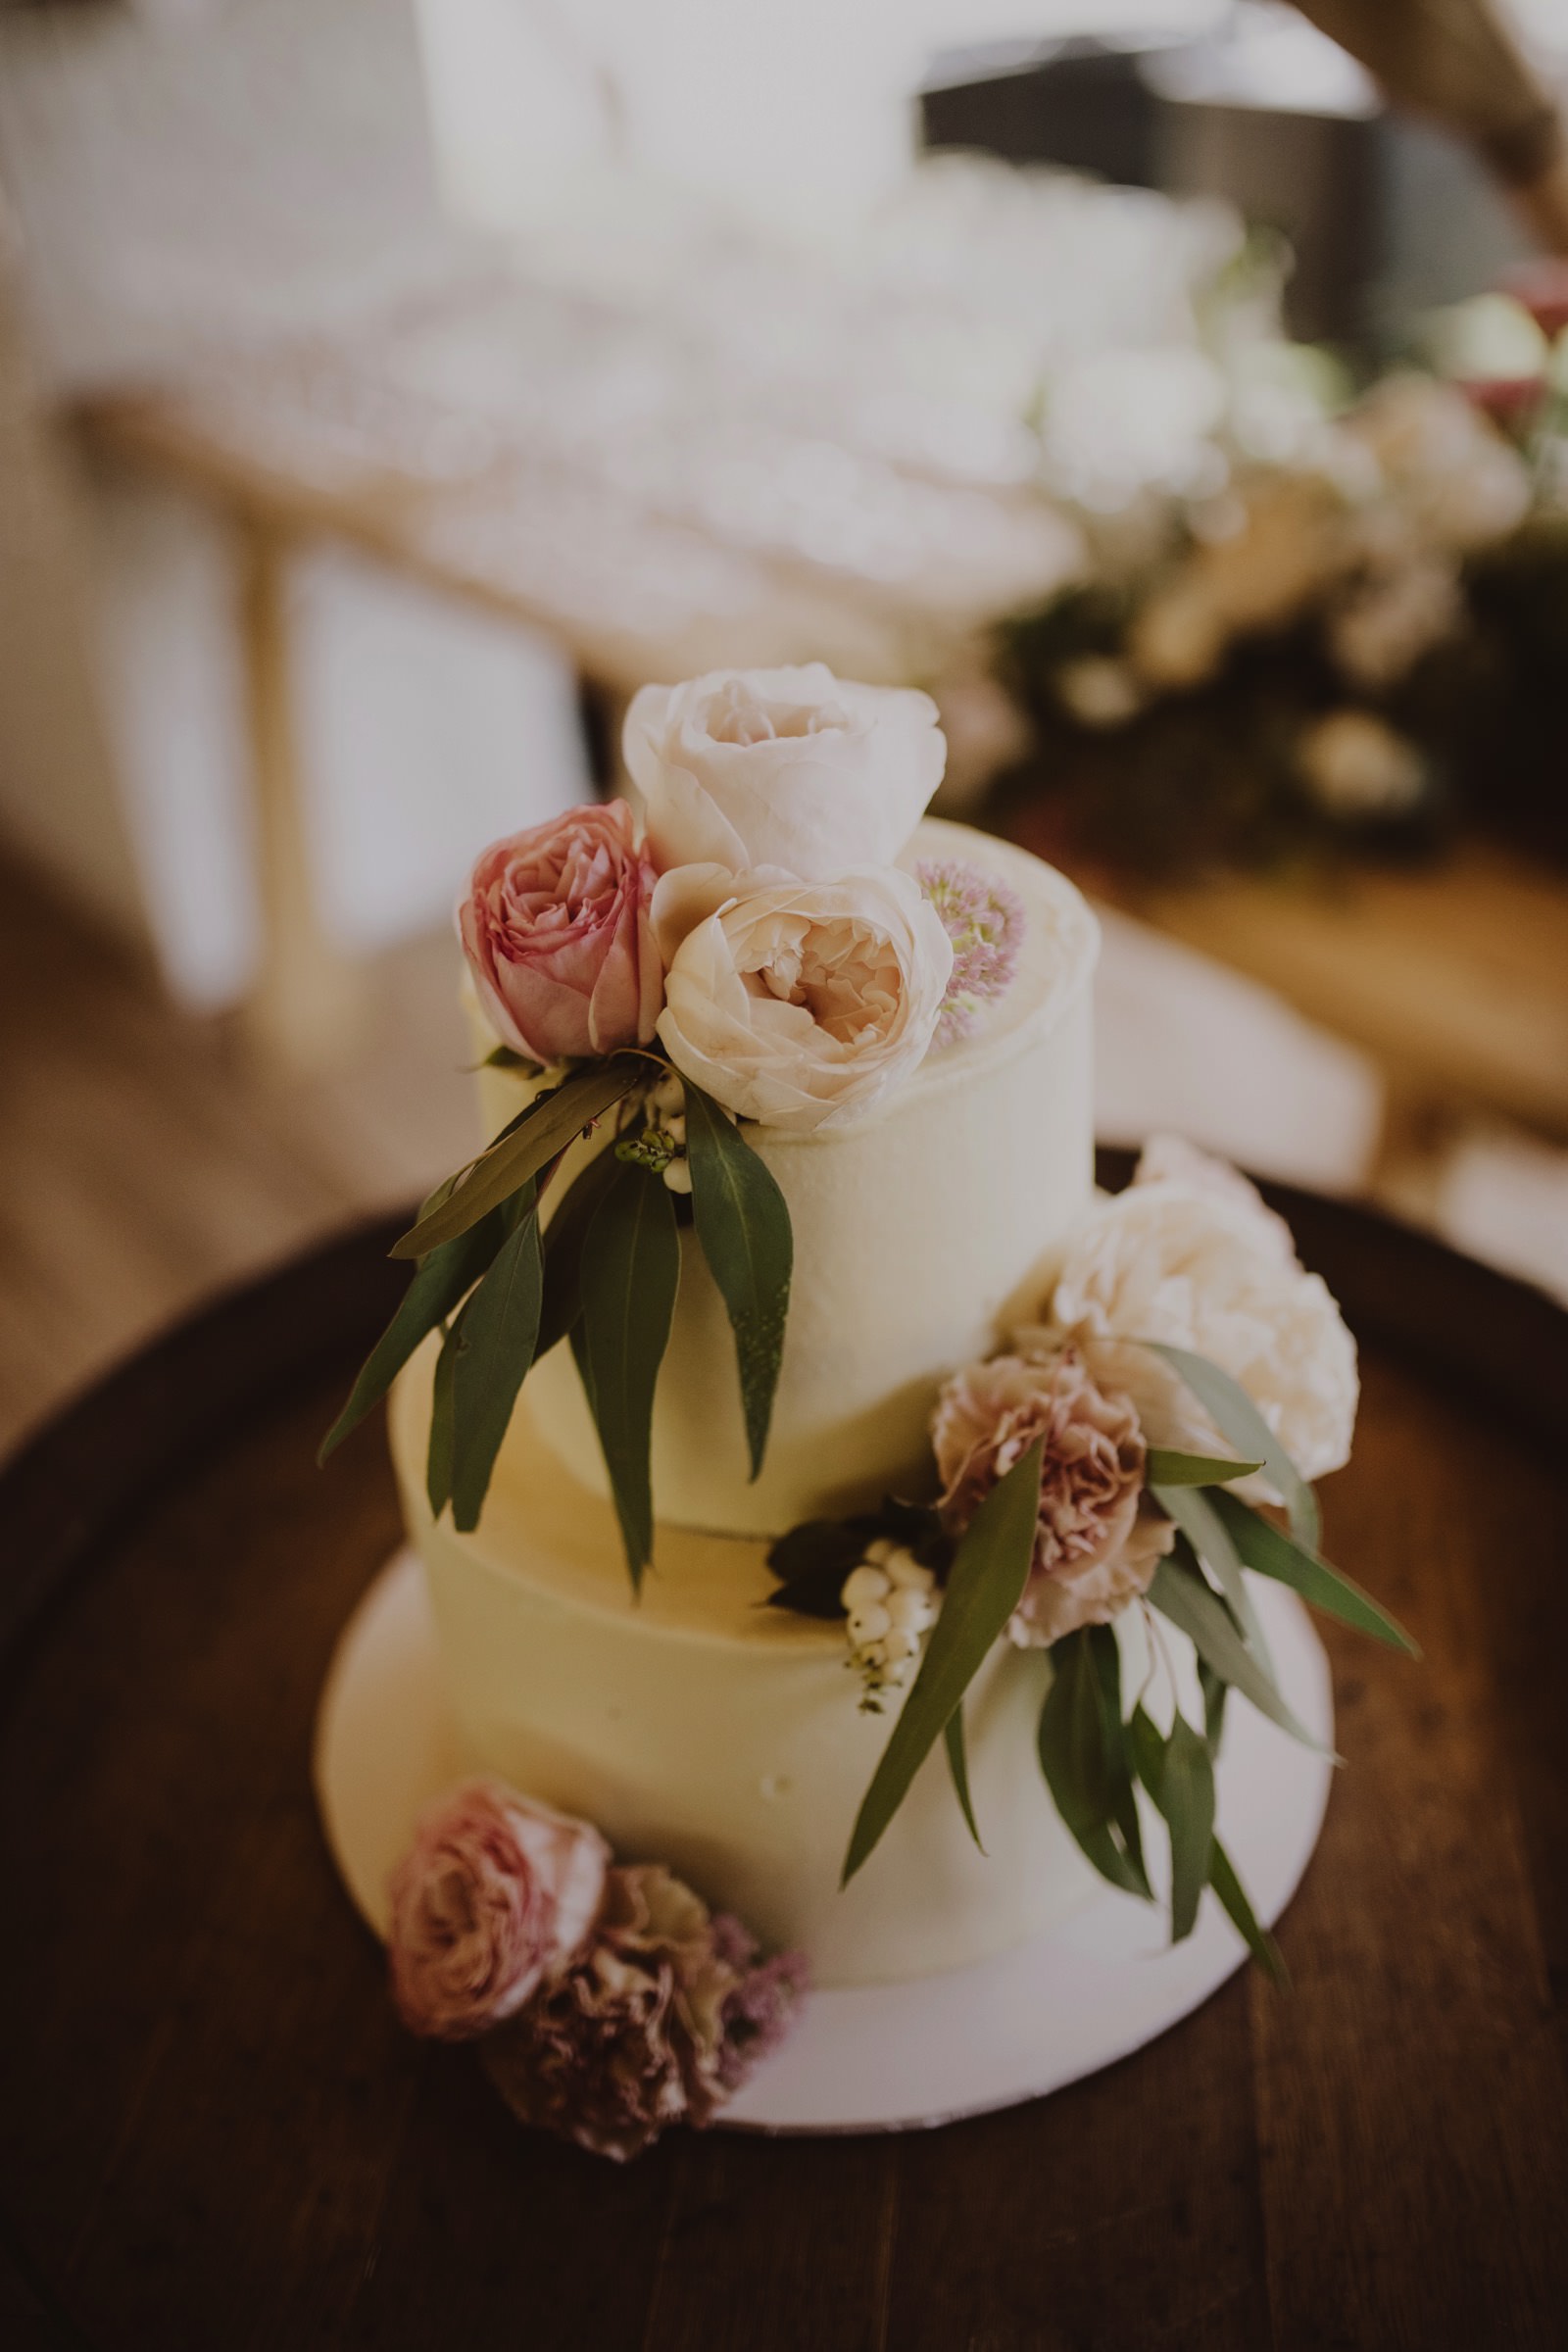 sarah and monte wedding cake with fresh flowers